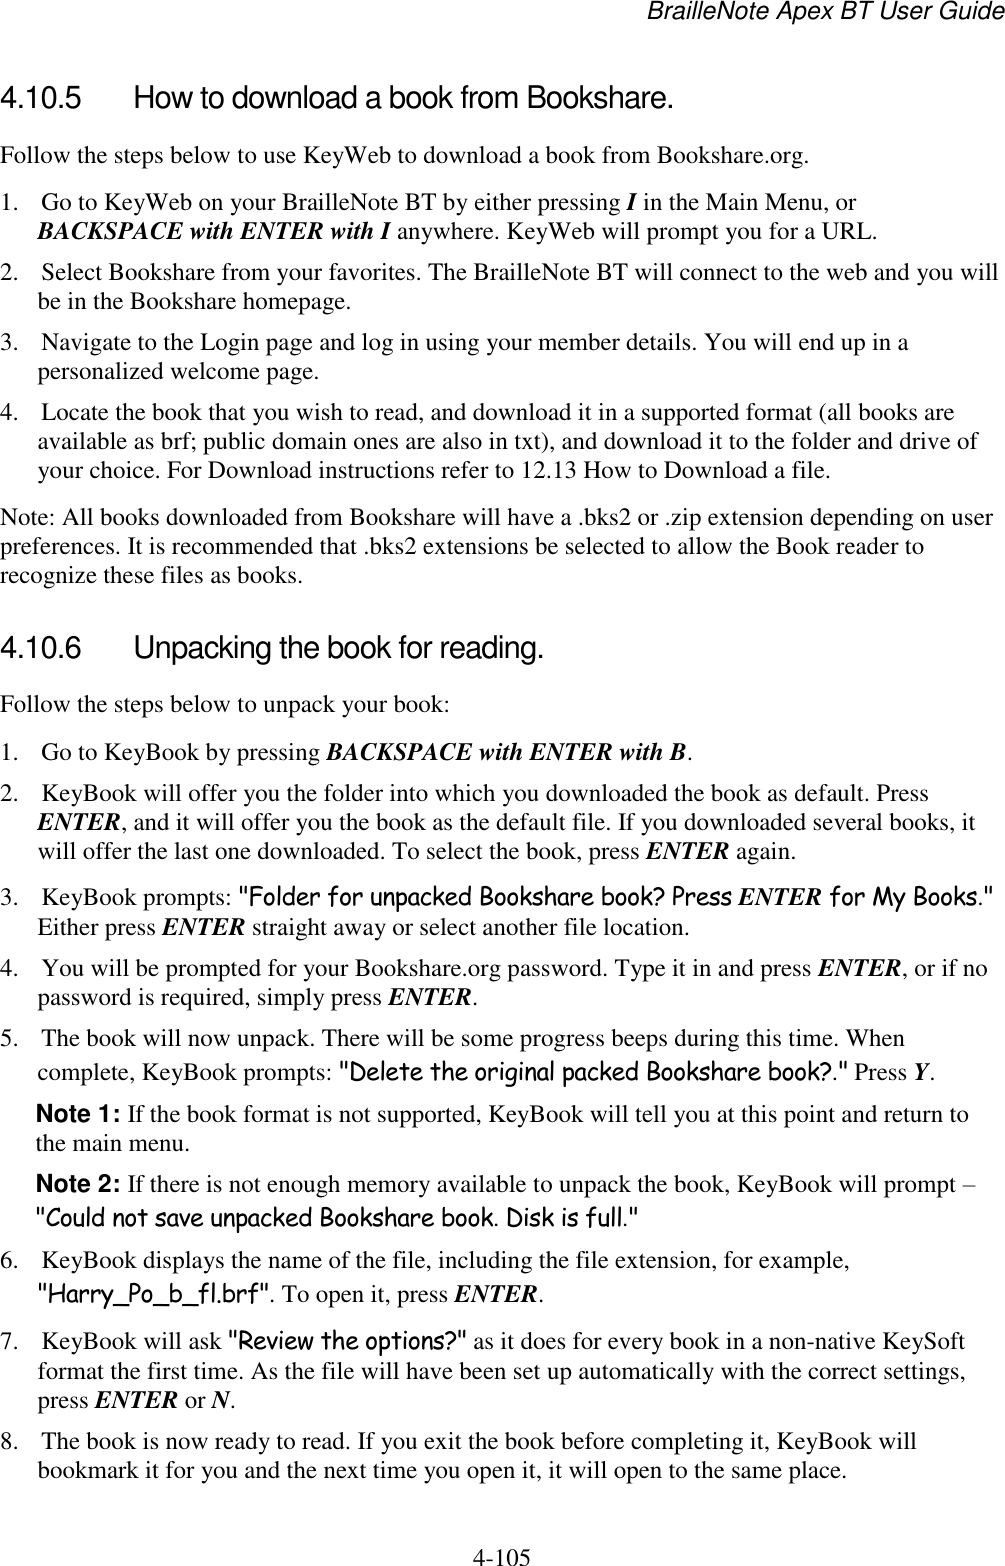 BrailleNote Apex BT User Guide   4-105   4.10.5  How to download a book from Bookshare. Follow the steps below to use KeyWeb to download a book from Bookshare.org. 1. Go to KeyWeb on your BrailleNote BT by either pressing I in the Main Menu, or BACKSPACE with ENTER with I anywhere. KeyWeb will prompt you for a URL. 2. Select Bookshare from your favorites. The BrailleNote BT will connect to the web and you will be in the Bookshare homepage. 3. Navigate to the Login page and log in using your member details. You will end up in a personalized welcome page. 4. Locate the book that you wish to read, and download it in a supported format (all books are available as brf; public domain ones are also in txt), and download it to the folder and drive of your choice. For Download instructions refer to 12.13 How to Download a file. Note: All books downloaded from Bookshare will have a .bks2 or .zip extension depending on user preferences. It is recommended that .bks2 extensions be selected to allow the Book reader to recognize these files as books.   4.10.6  Unpacking the book for reading. Follow the steps below to unpack your book: 1. Go to KeyBook by pressing BACKSPACE with ENTER with B. 2. KeyBook will offer you the folder into which you downloaded the book as default. Press ENTER, and it will offer you the book as the default file. If you downloaded several books, it will offer the last one downloaded. To select the book, press ENTER again. 3. KeyBook prompts: &quot;Folder for unpacked Bookshare book? Press ENTER for My Books.&quot; Either press ENTER straight away or select another file location. 4. You will be prompted for your Bookshare.org password. Type it in and press ENTER, or if no password is required, simply press ENTER. 5. The book will now unpack. There will be some progress beeps during this time. When complete, KeyBook prompts: &quot;Delete the original packed Bookshare book?.&quot; Press Y. Note 1: If the book format is not supported, KeyBook will tell you at this point and return to the main menu. Note 2: If there is not enough memory available to unpack the book, KeyBook will prompt – &quot;Could not save unpacked Bookshare book. Disk is full.&quot; 6. KeyBook displays the name of the file, including the file extension, for example, &quot;Harry_Po_b_fl.brf&quot;. To open it, press ENTER. 7. KeyBook will ask &quot;Review the options?&quot; as it does for every book in a non-native KeySoft format the first time. As the file will have been set up automatically with the correct settings, press ENTER or N. 8. The book is now ready to read. If you exit the book before completing it, KeyBook will bookmark it for you and the next time you open it, it will open to the same place. 